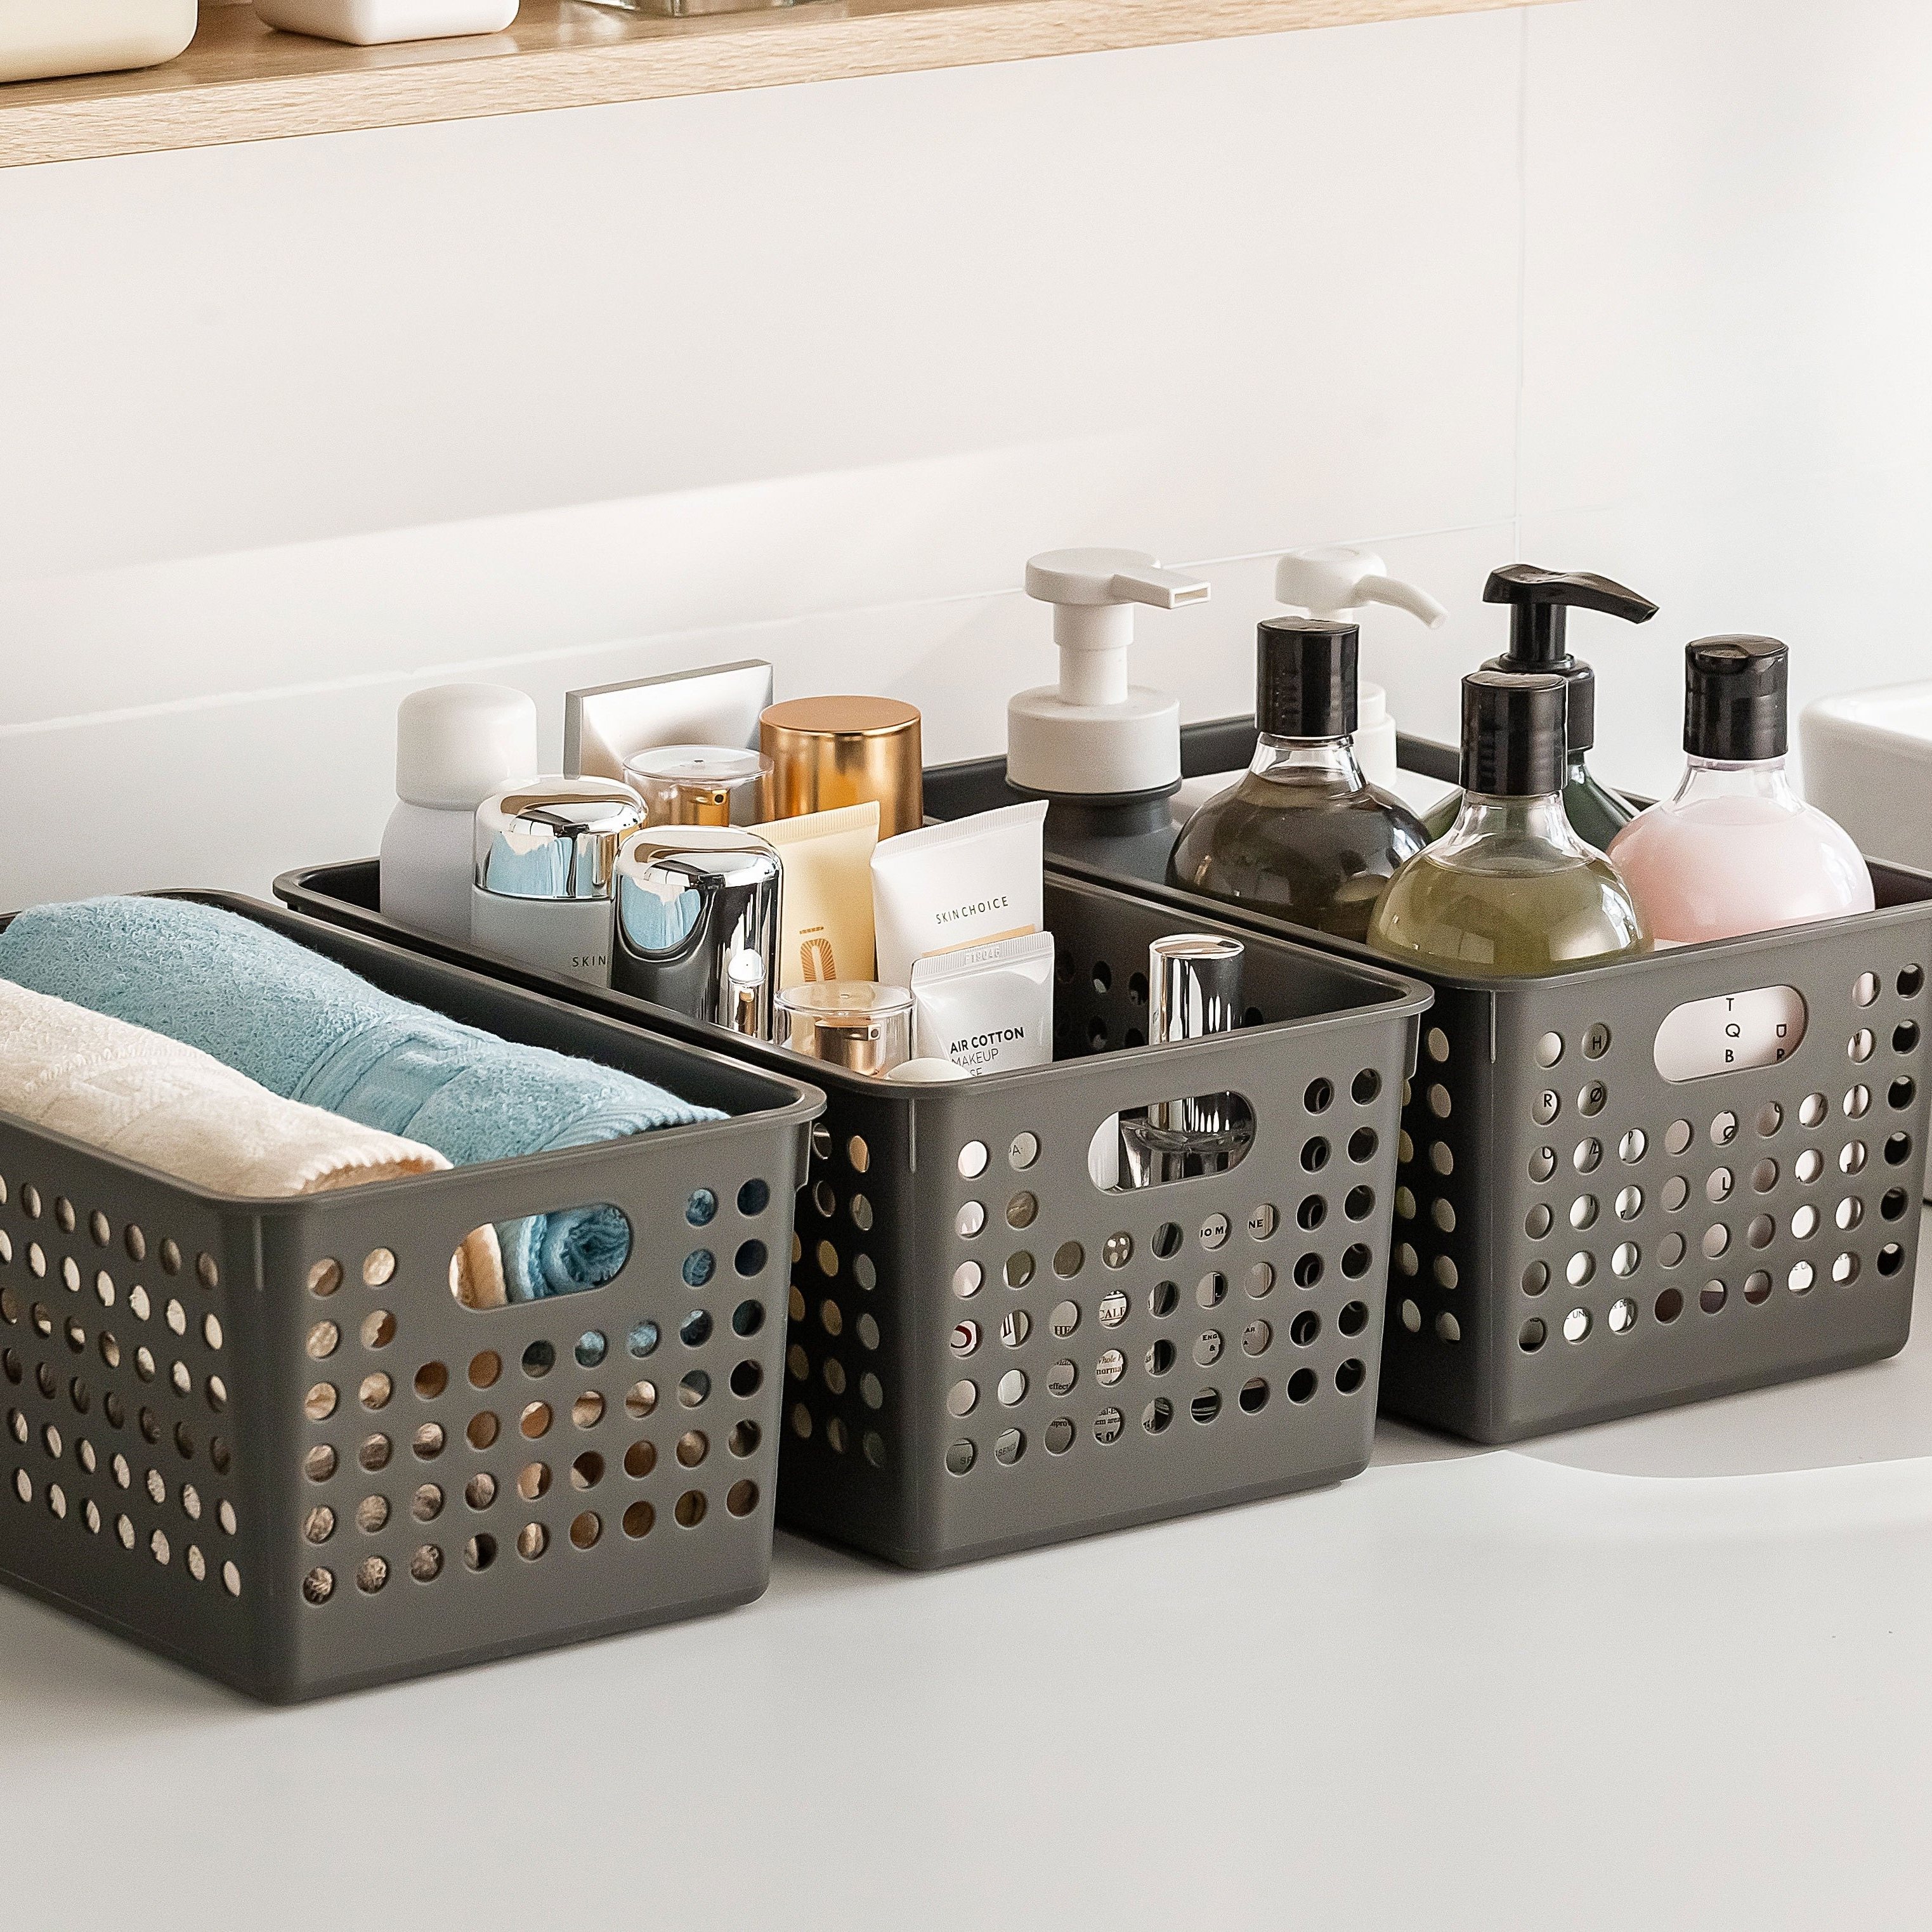 Small Storage Baskets for Organizing